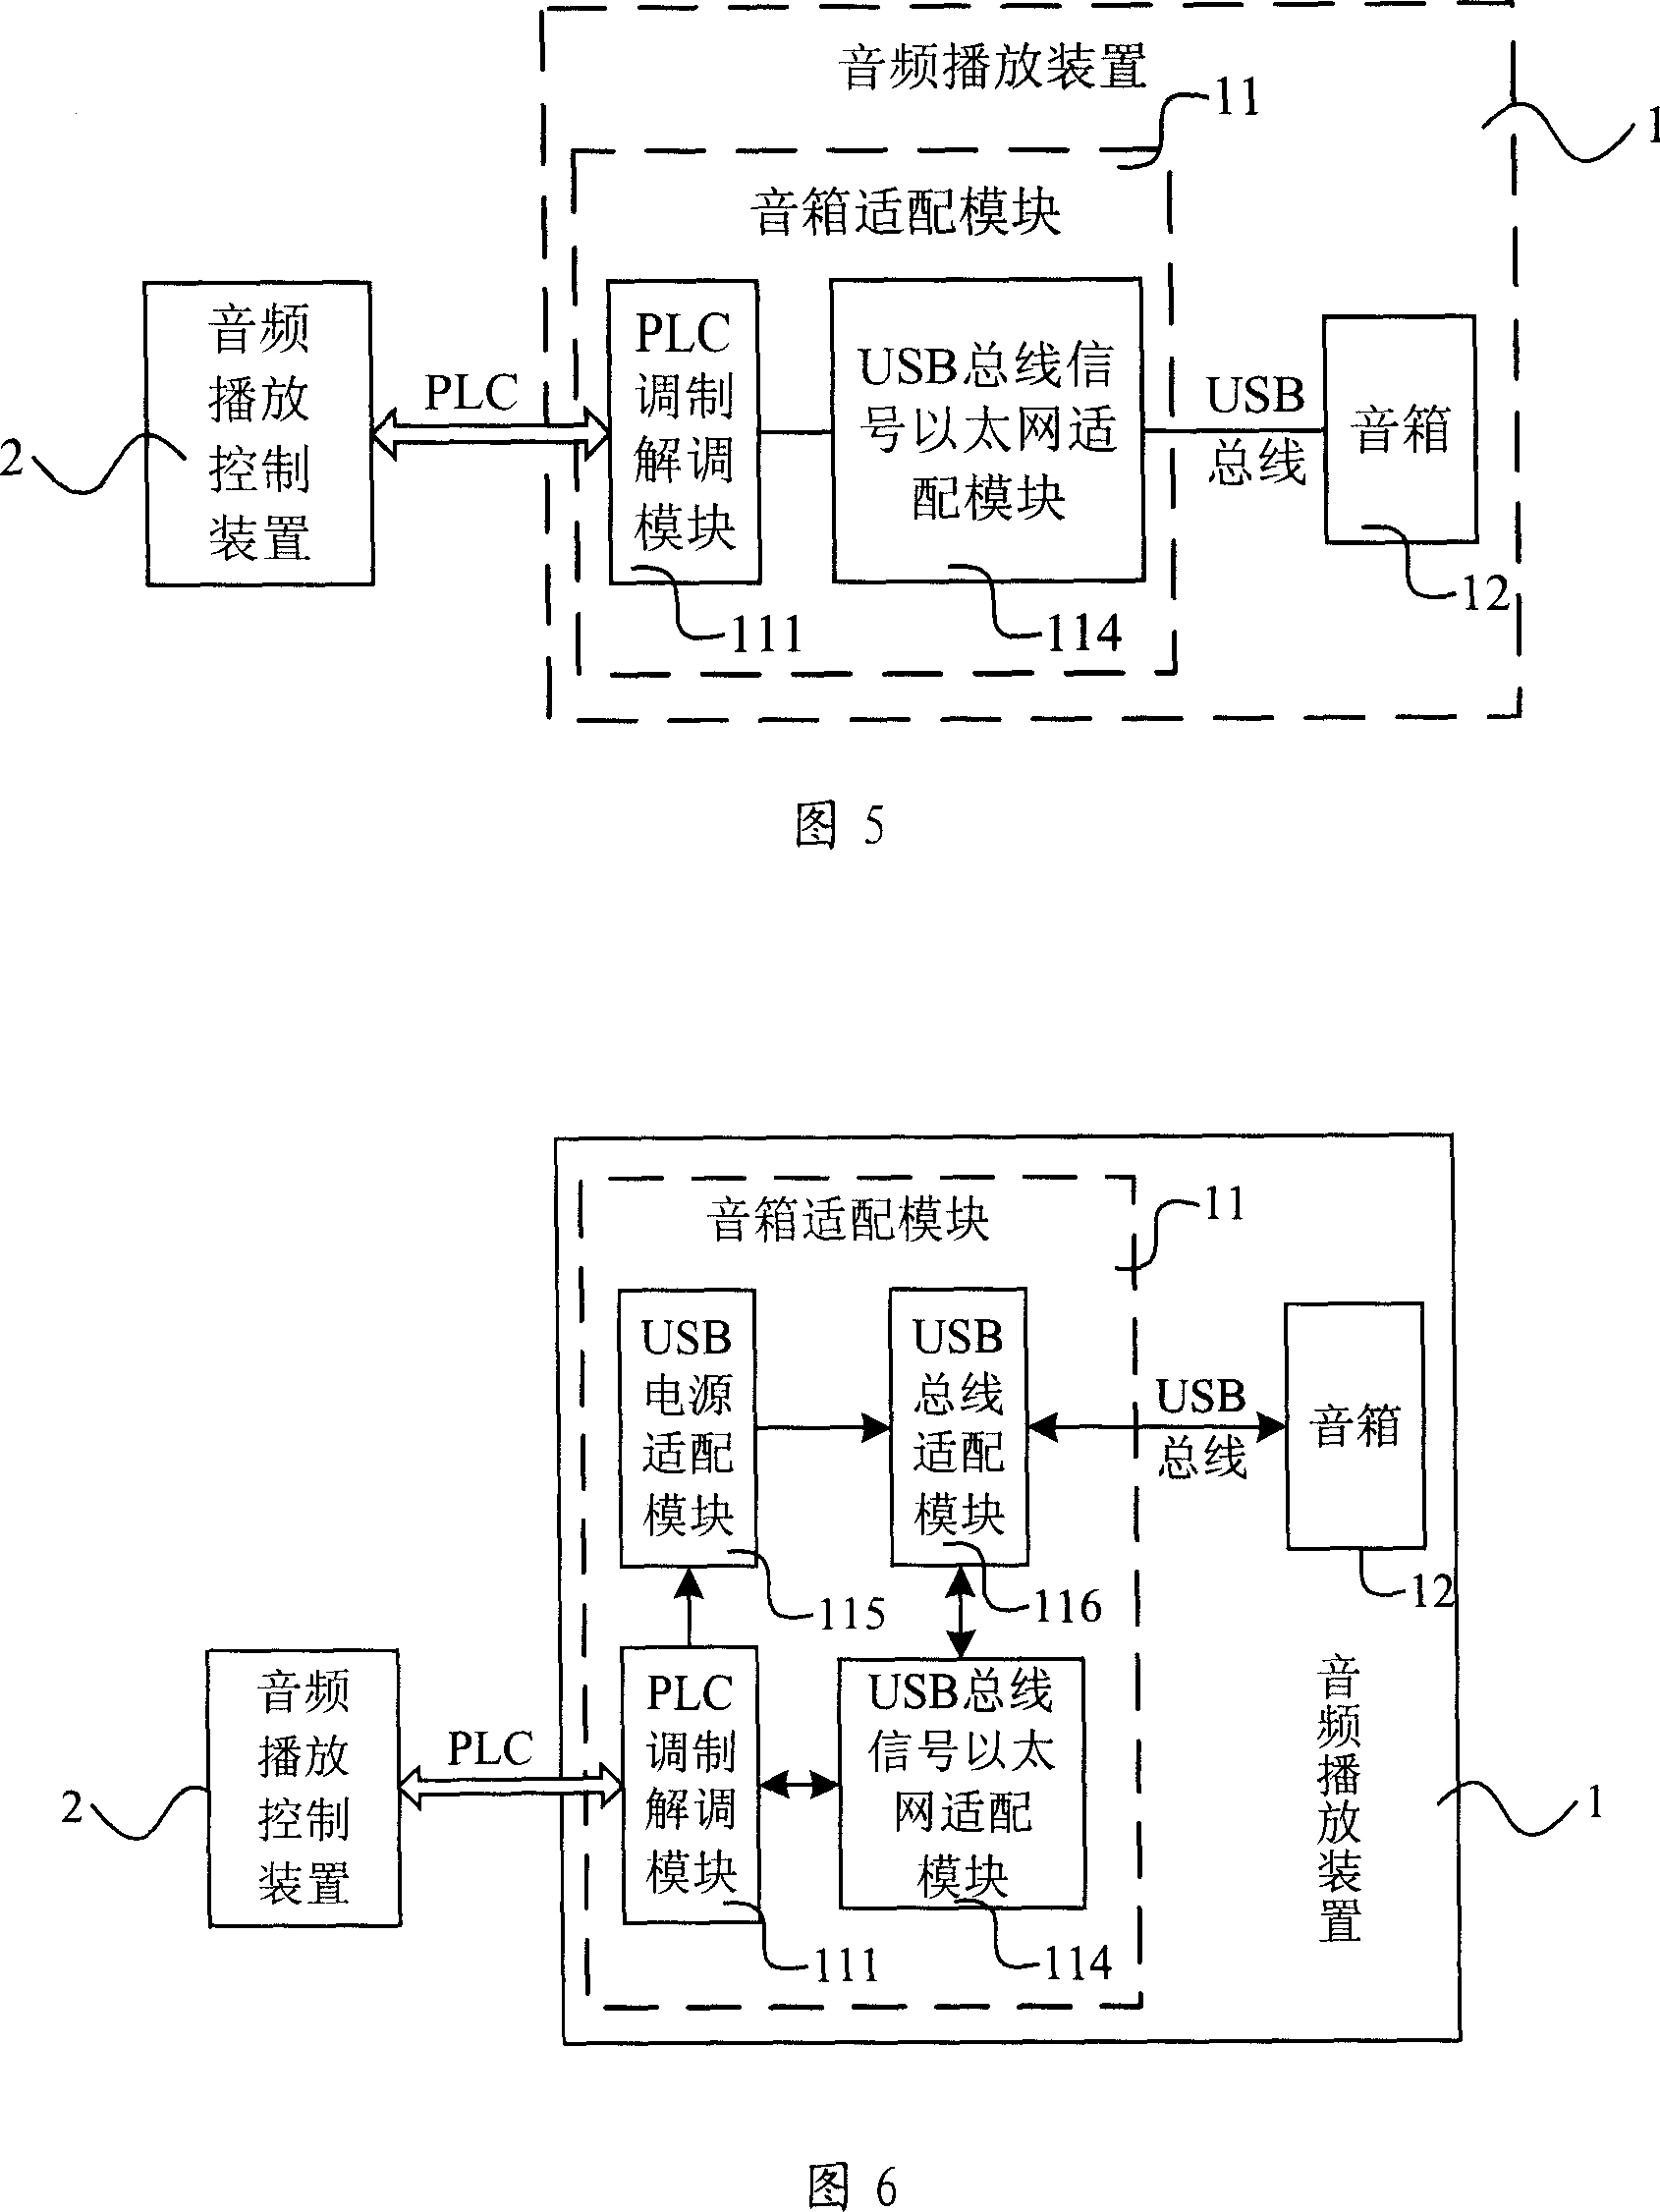 Audio playing system and audio playing control method